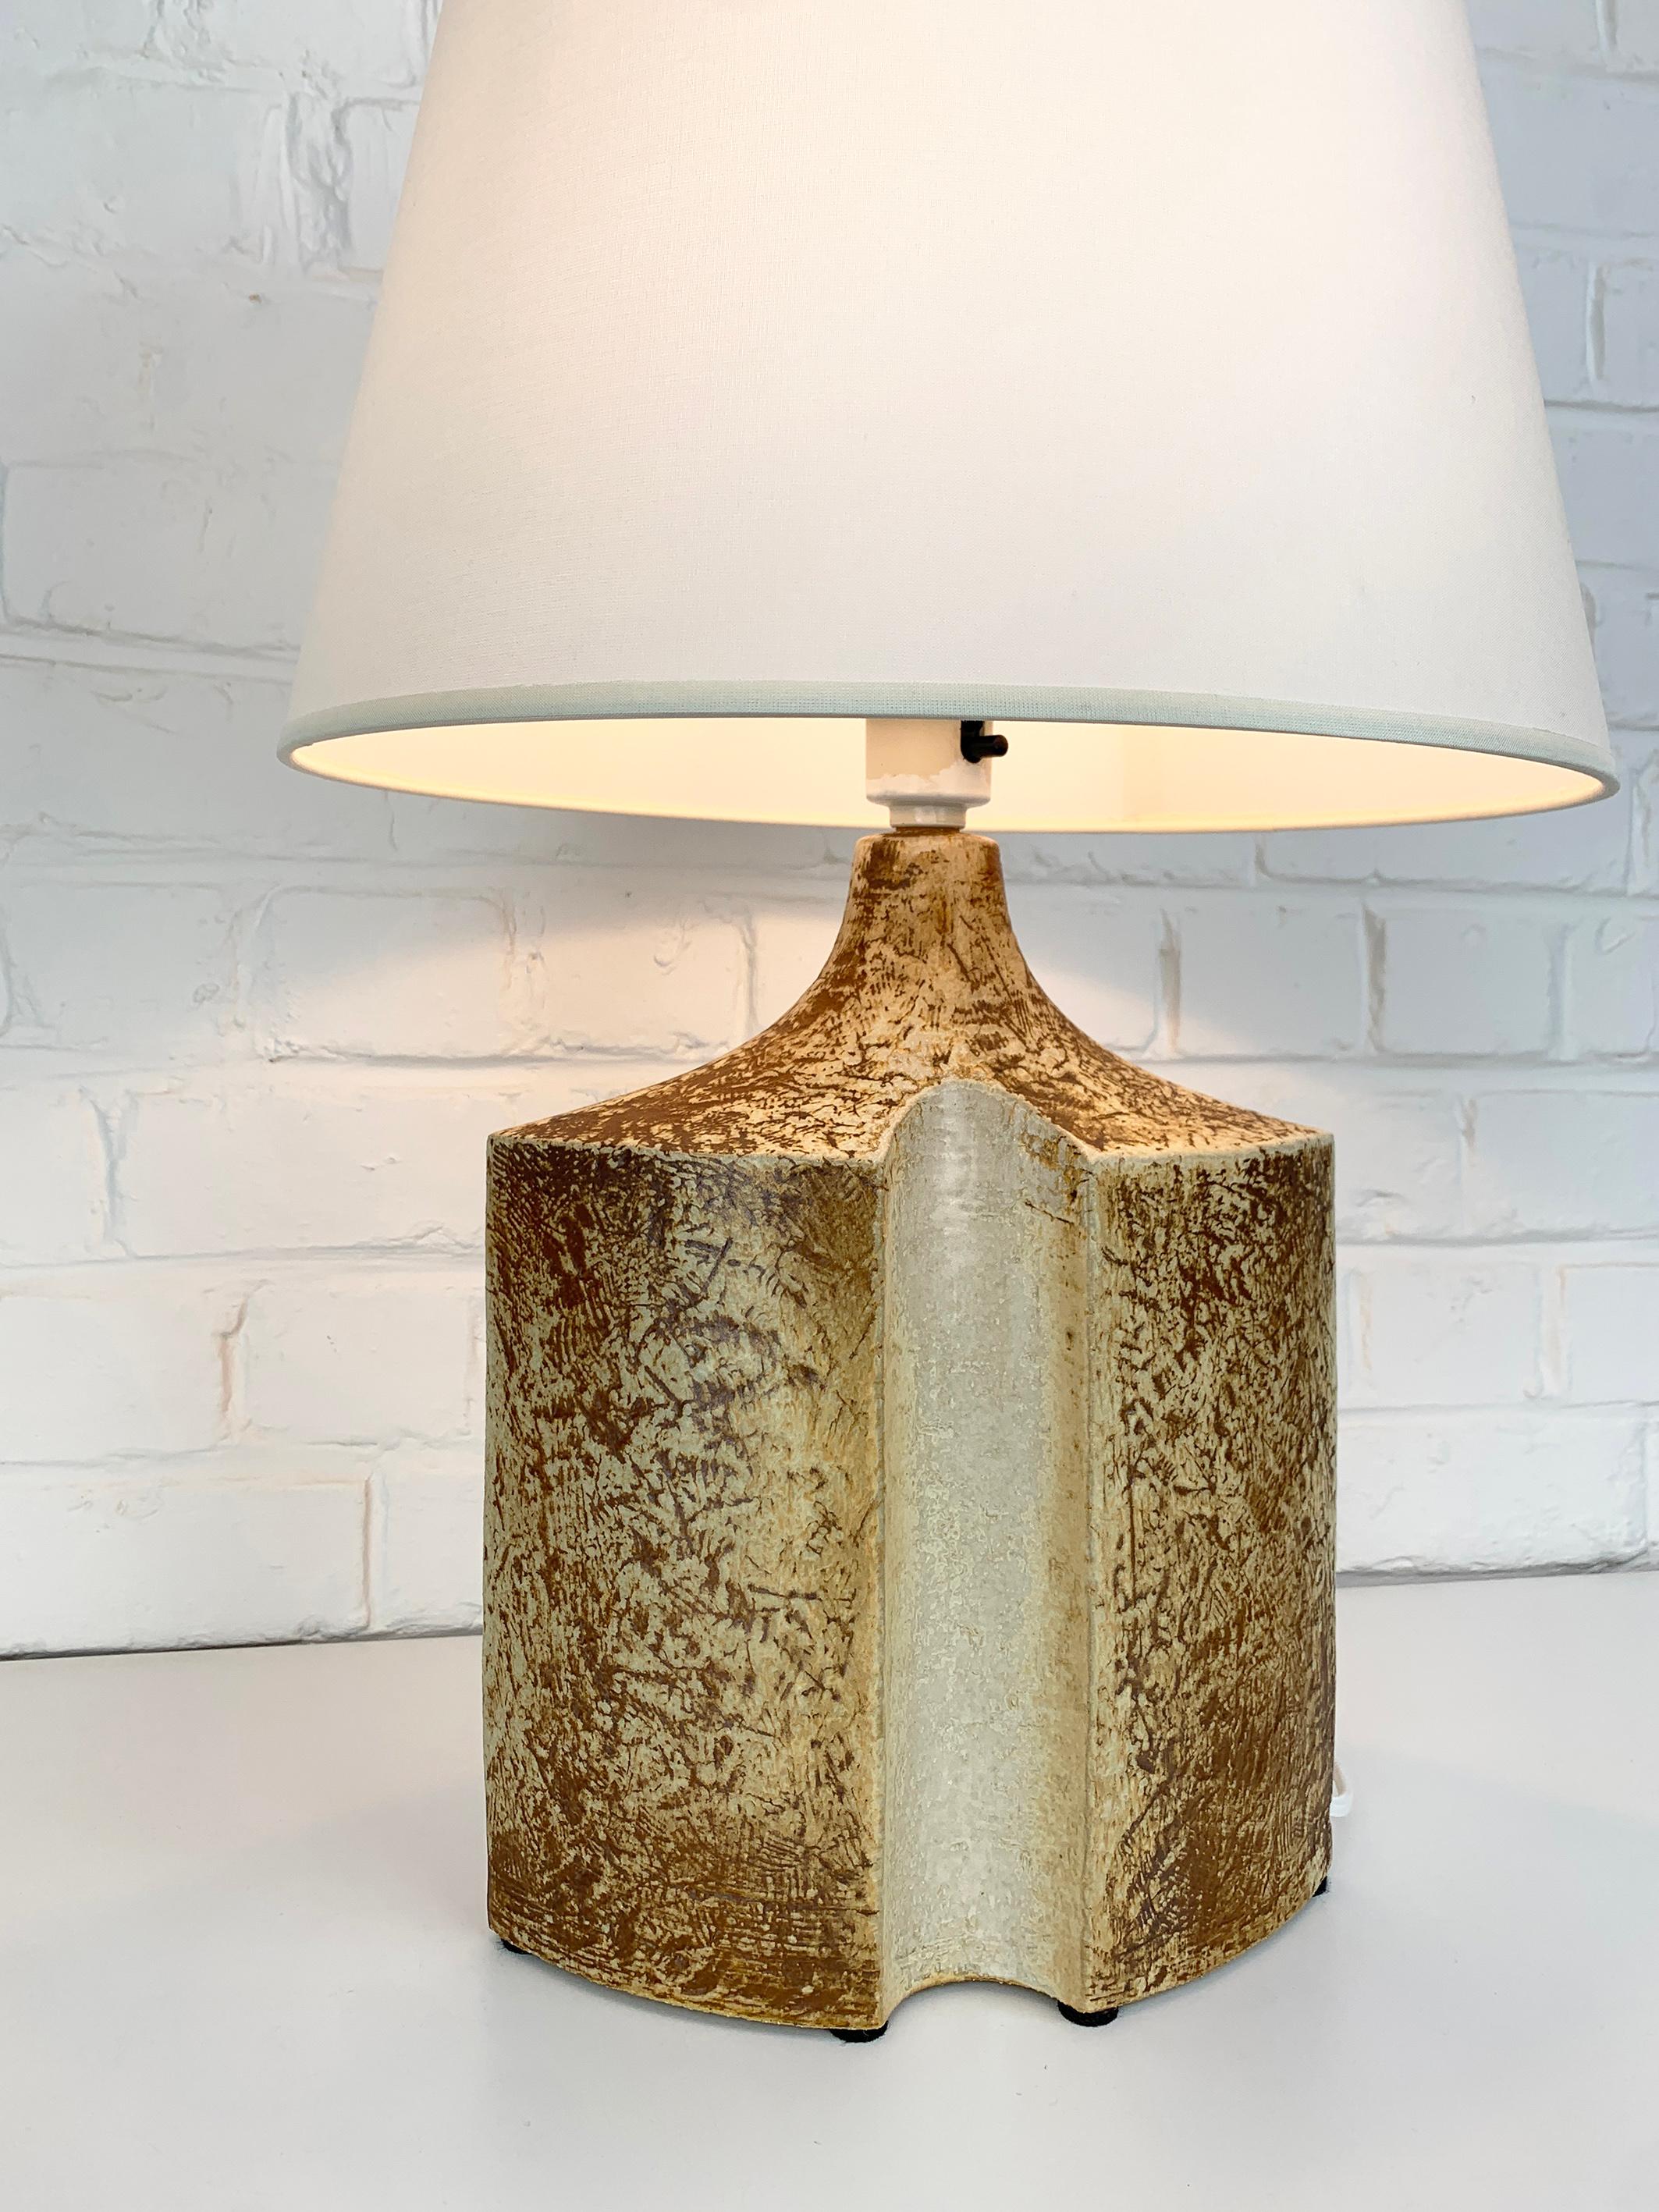 Danish Mid-Century stoneware table lamp of the 1970s by Haico Nitzsche. Sculptural lamp in earthy colored glazed stoneware. 

Haico Nitzsche trained in ceramics in Germany before teaching at the National Institute of Design in Ahmedabad, India in